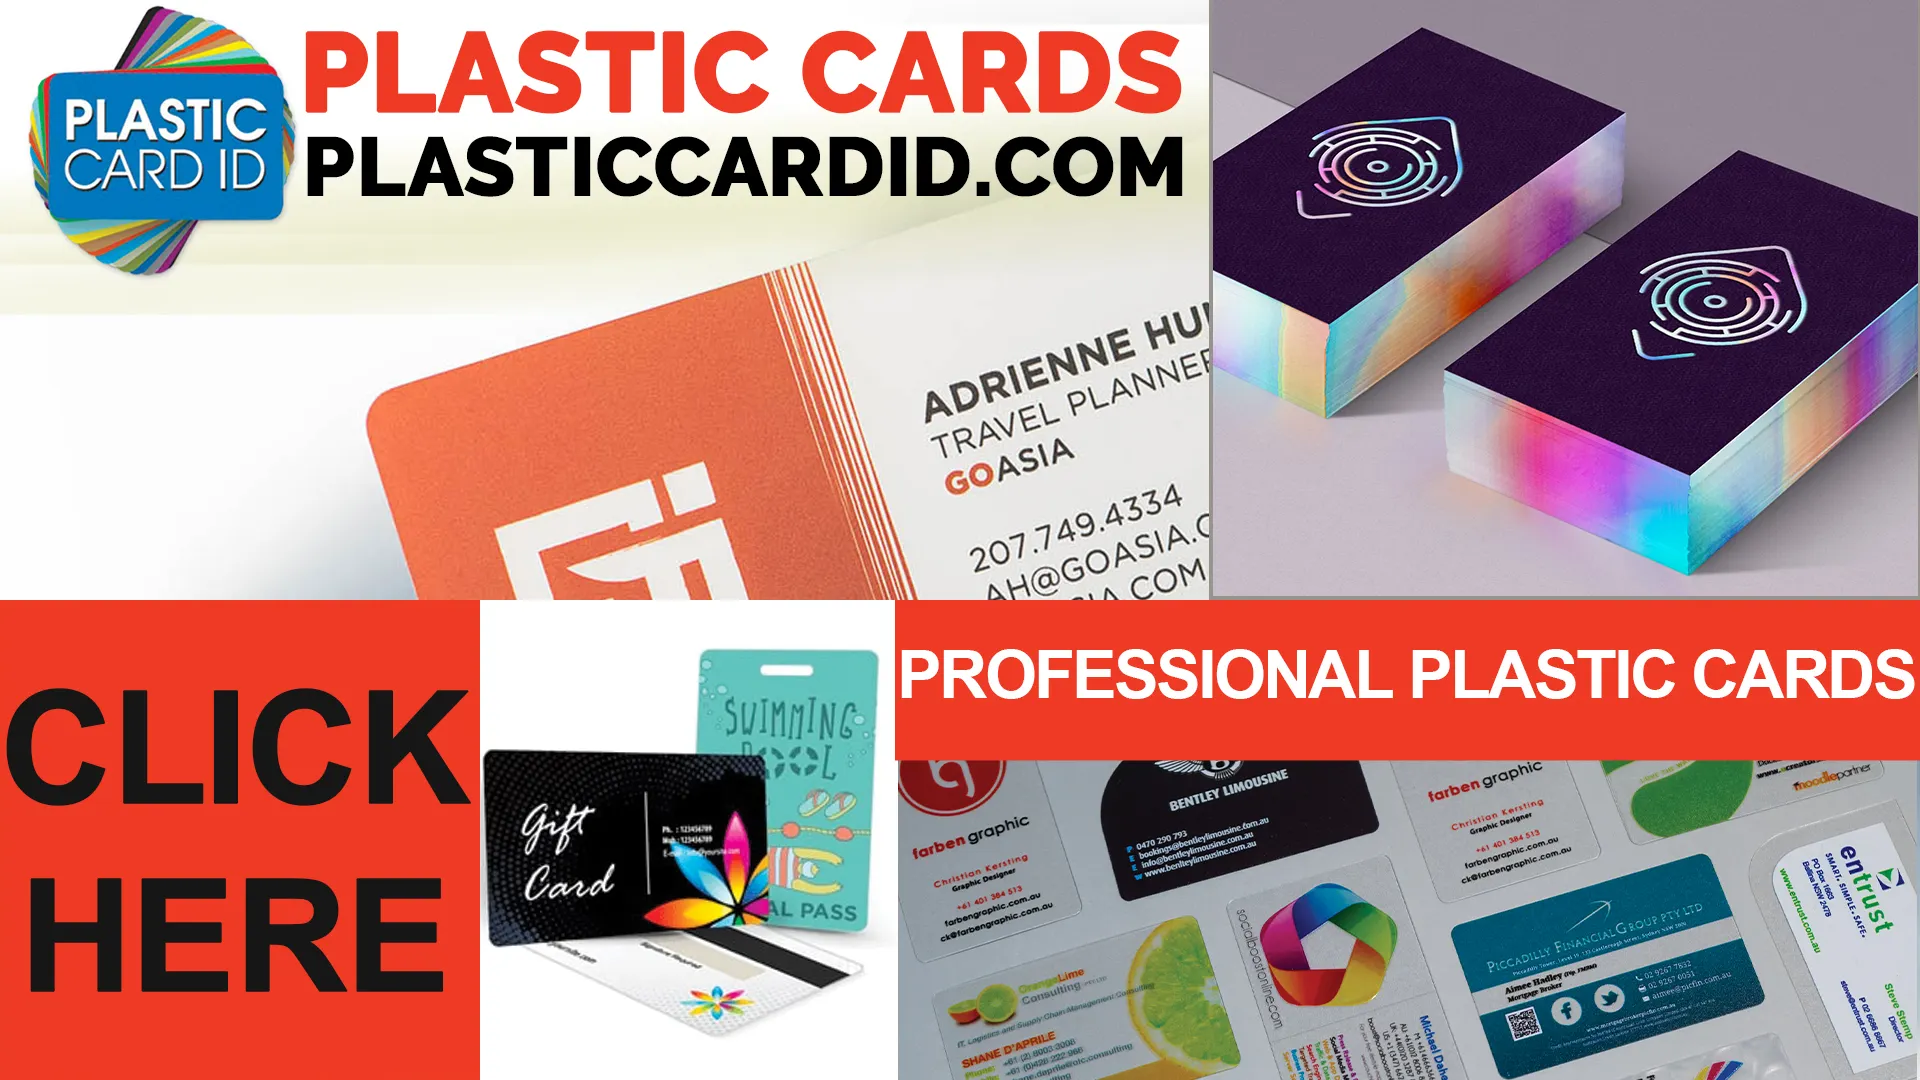 Key Features of Plastic Card ID




's Digital and Plastic Card Solutions